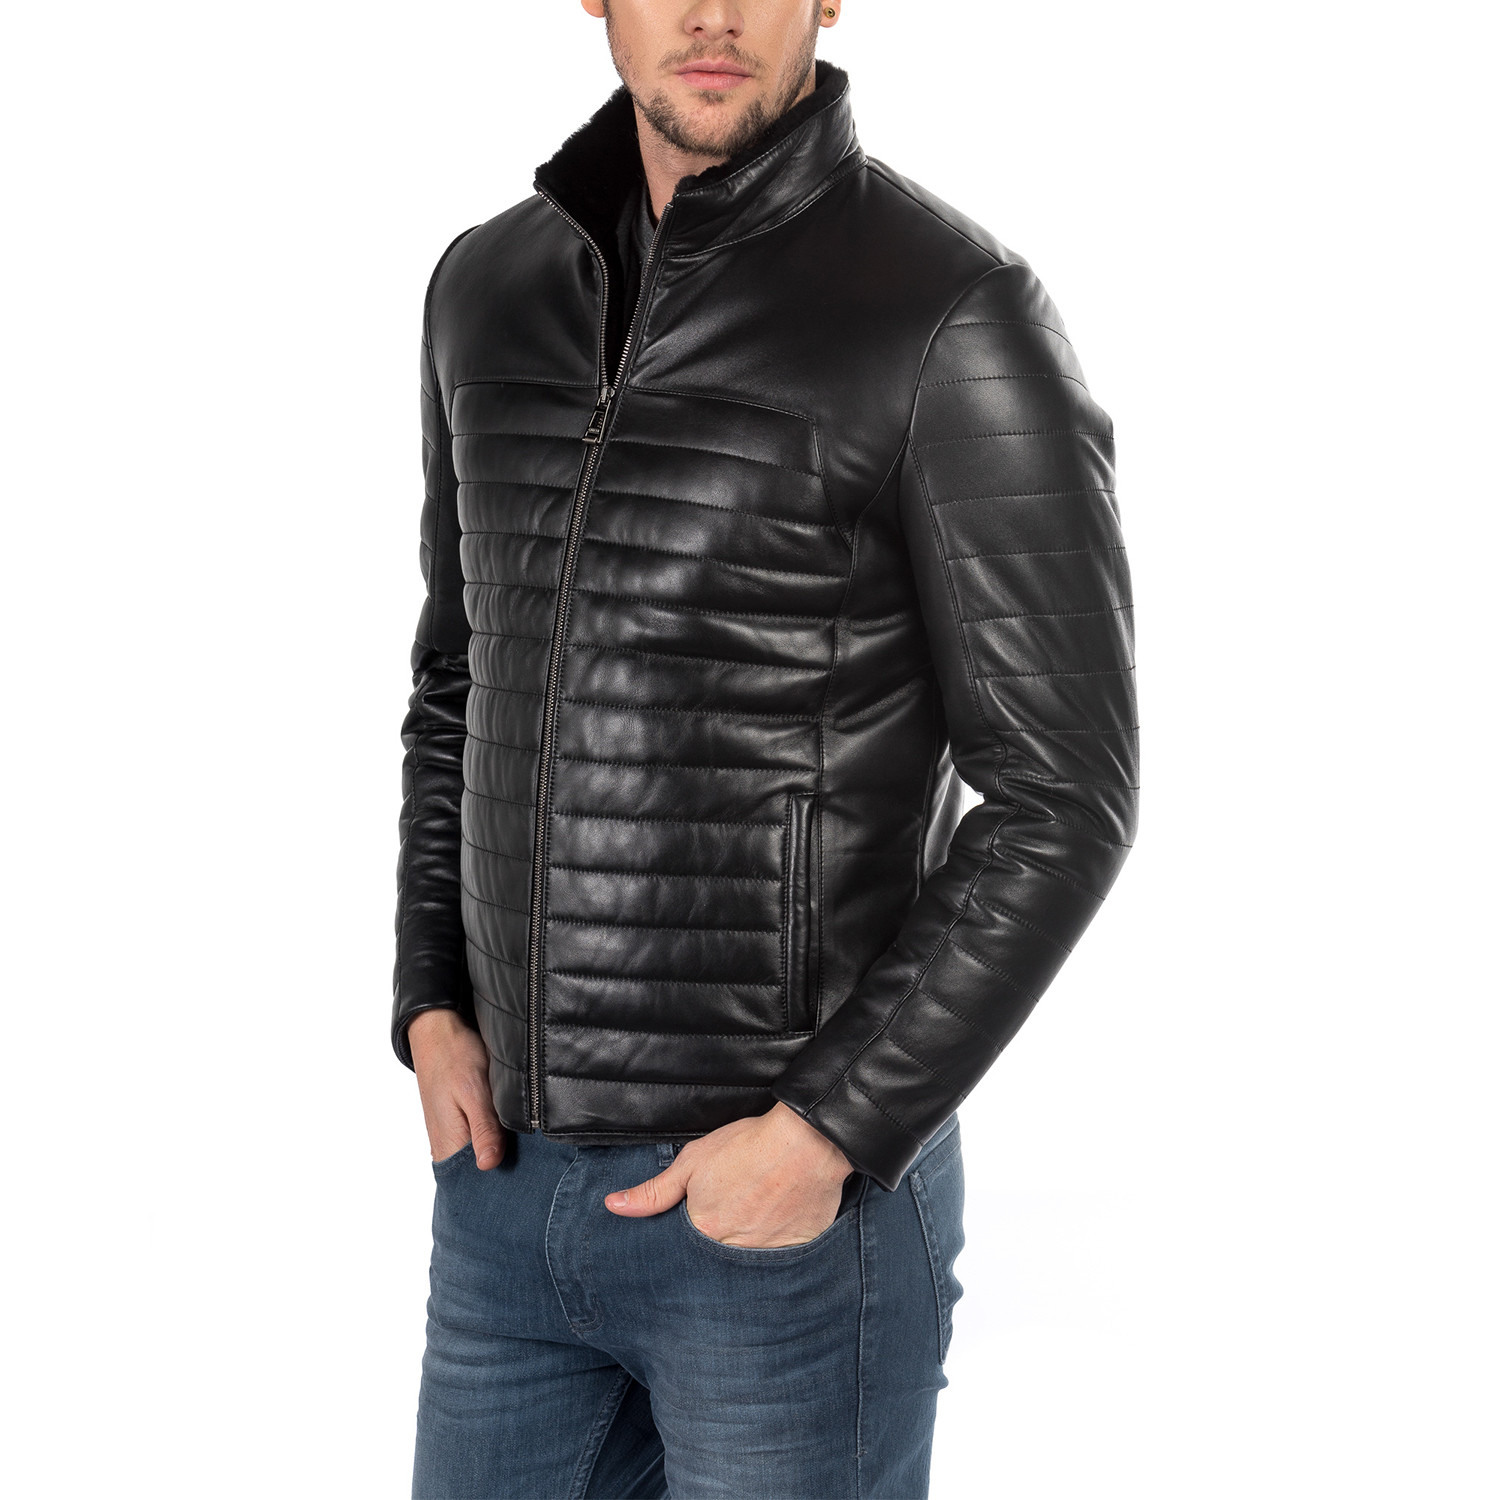 Charles Leather Jacket Slim // Black (XL) - Ruck & Maul - Touch of Modern